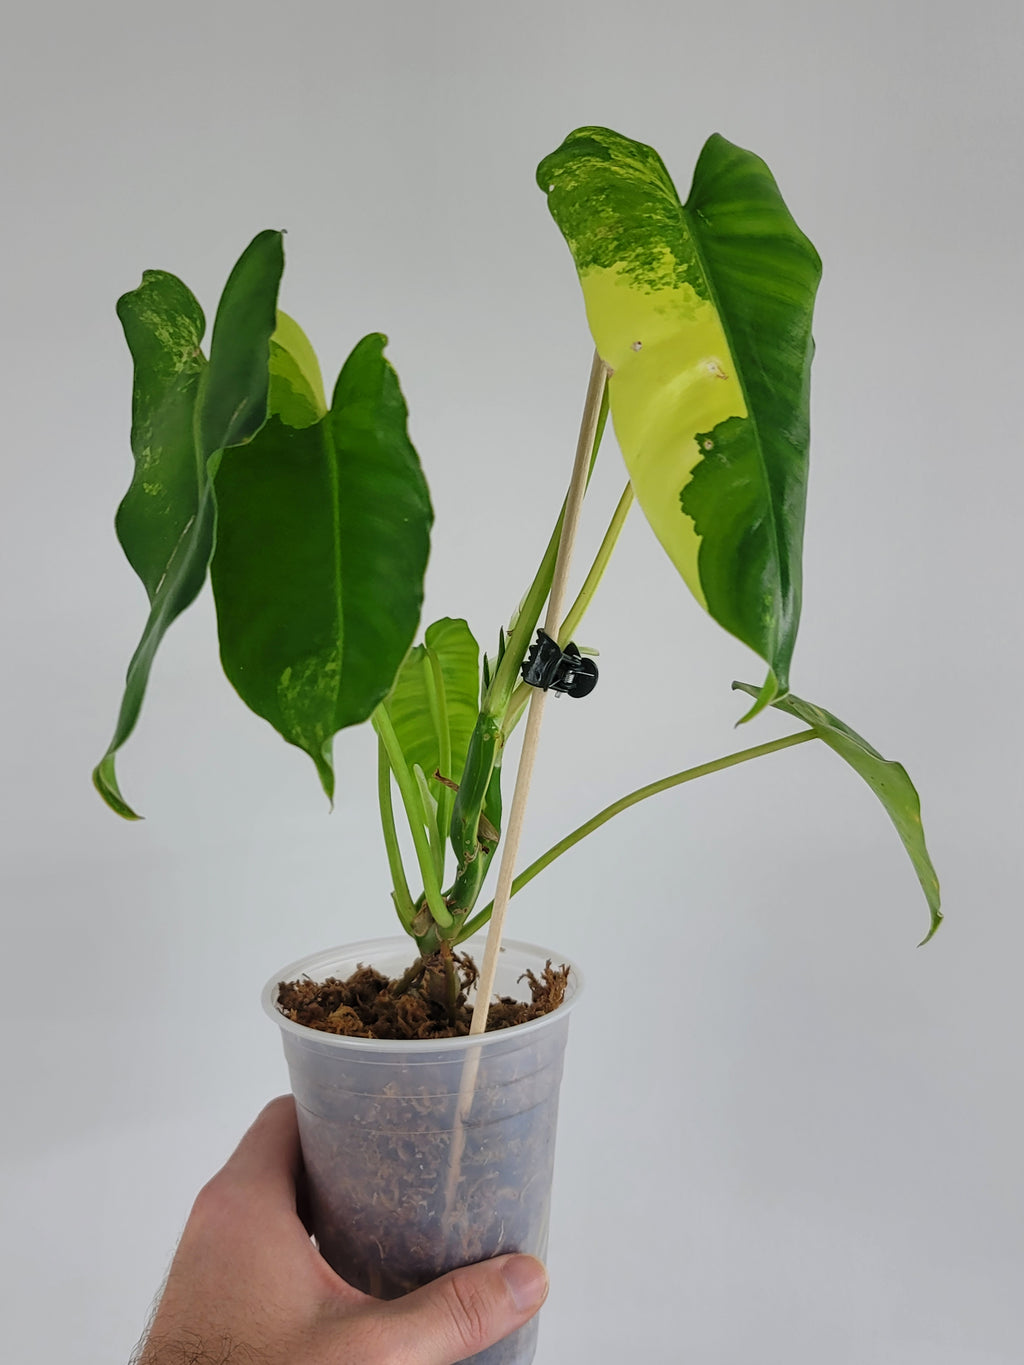 Philodendron Burle Marx Variegated "A2"